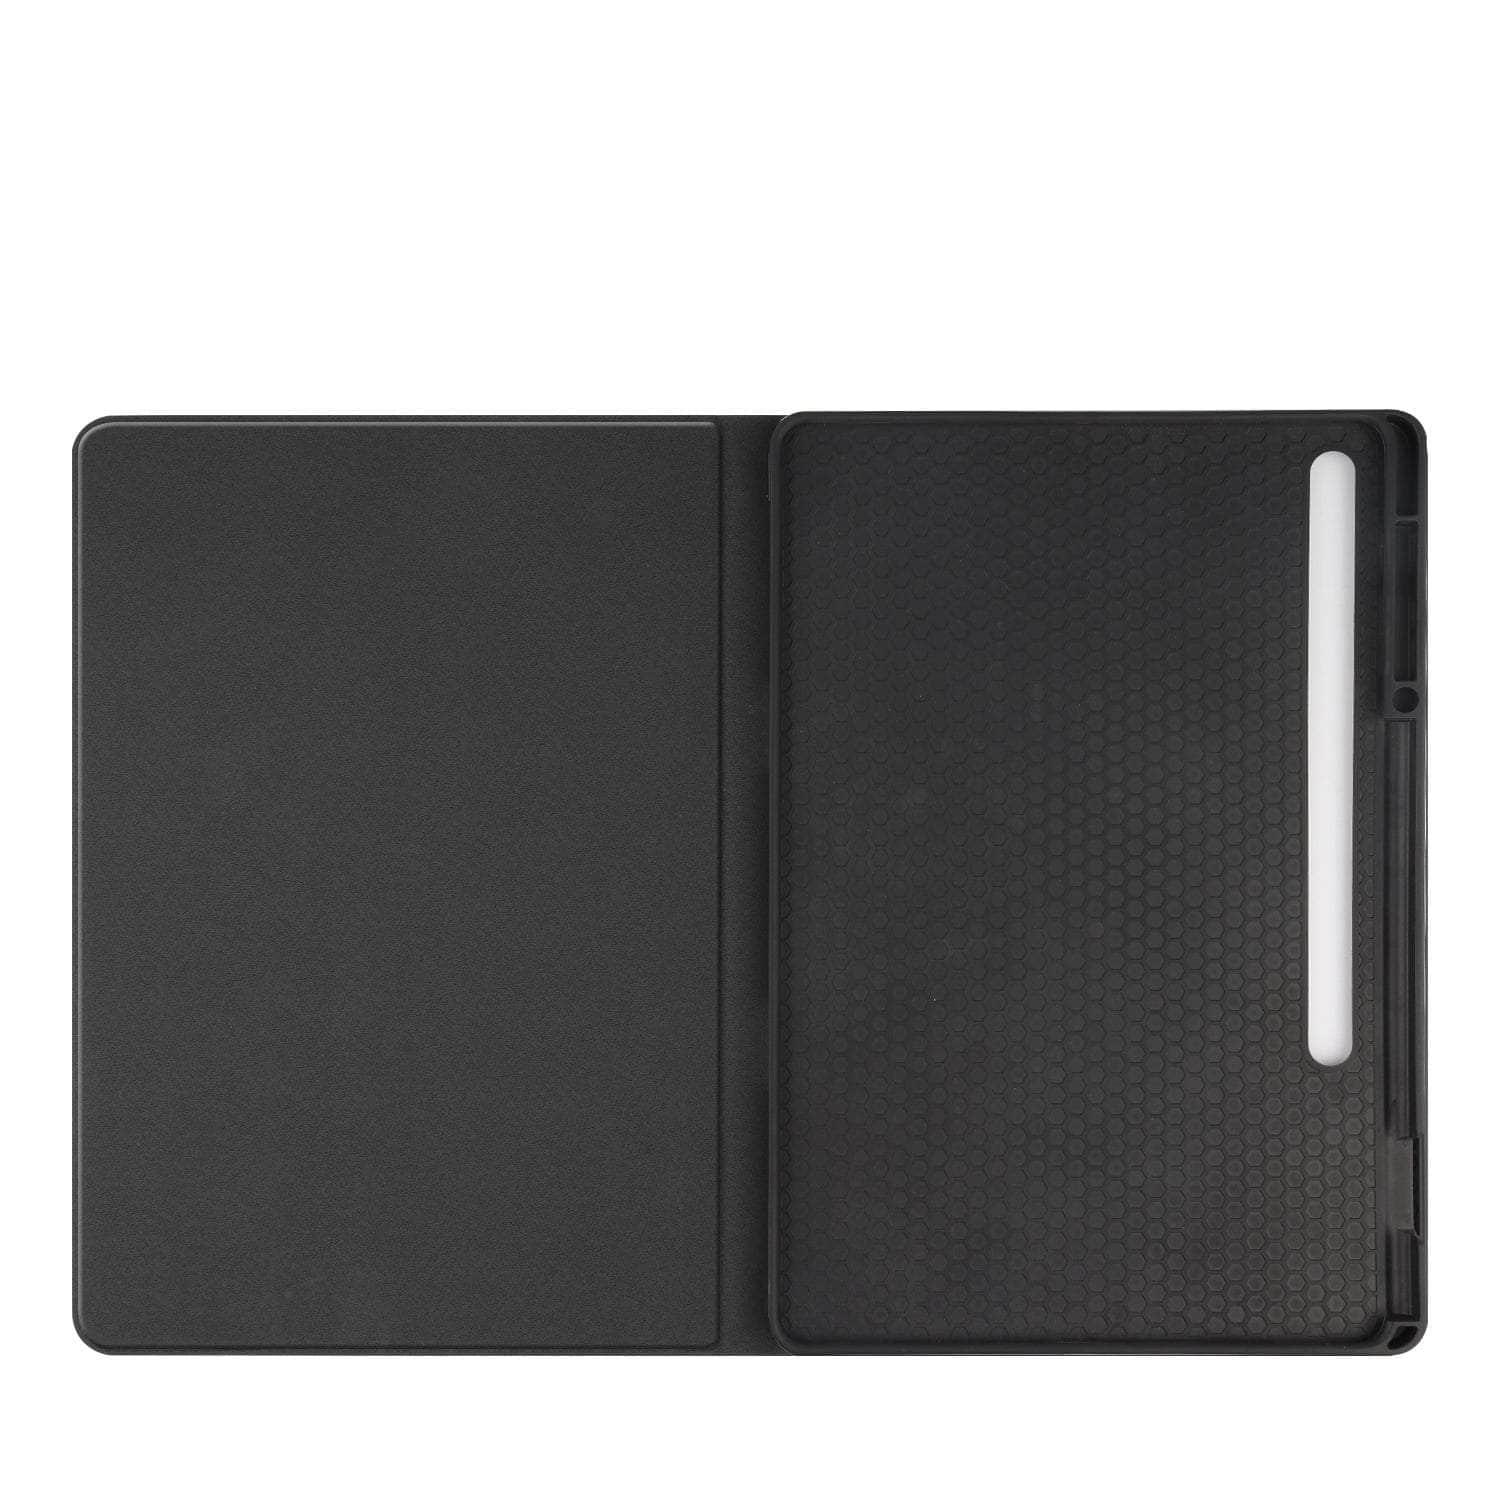 CaseBuddy Australia Casebuddy Smart Tab S8 Ultra X906 Protective Magnetic Adsorption Cowhide Leather Case